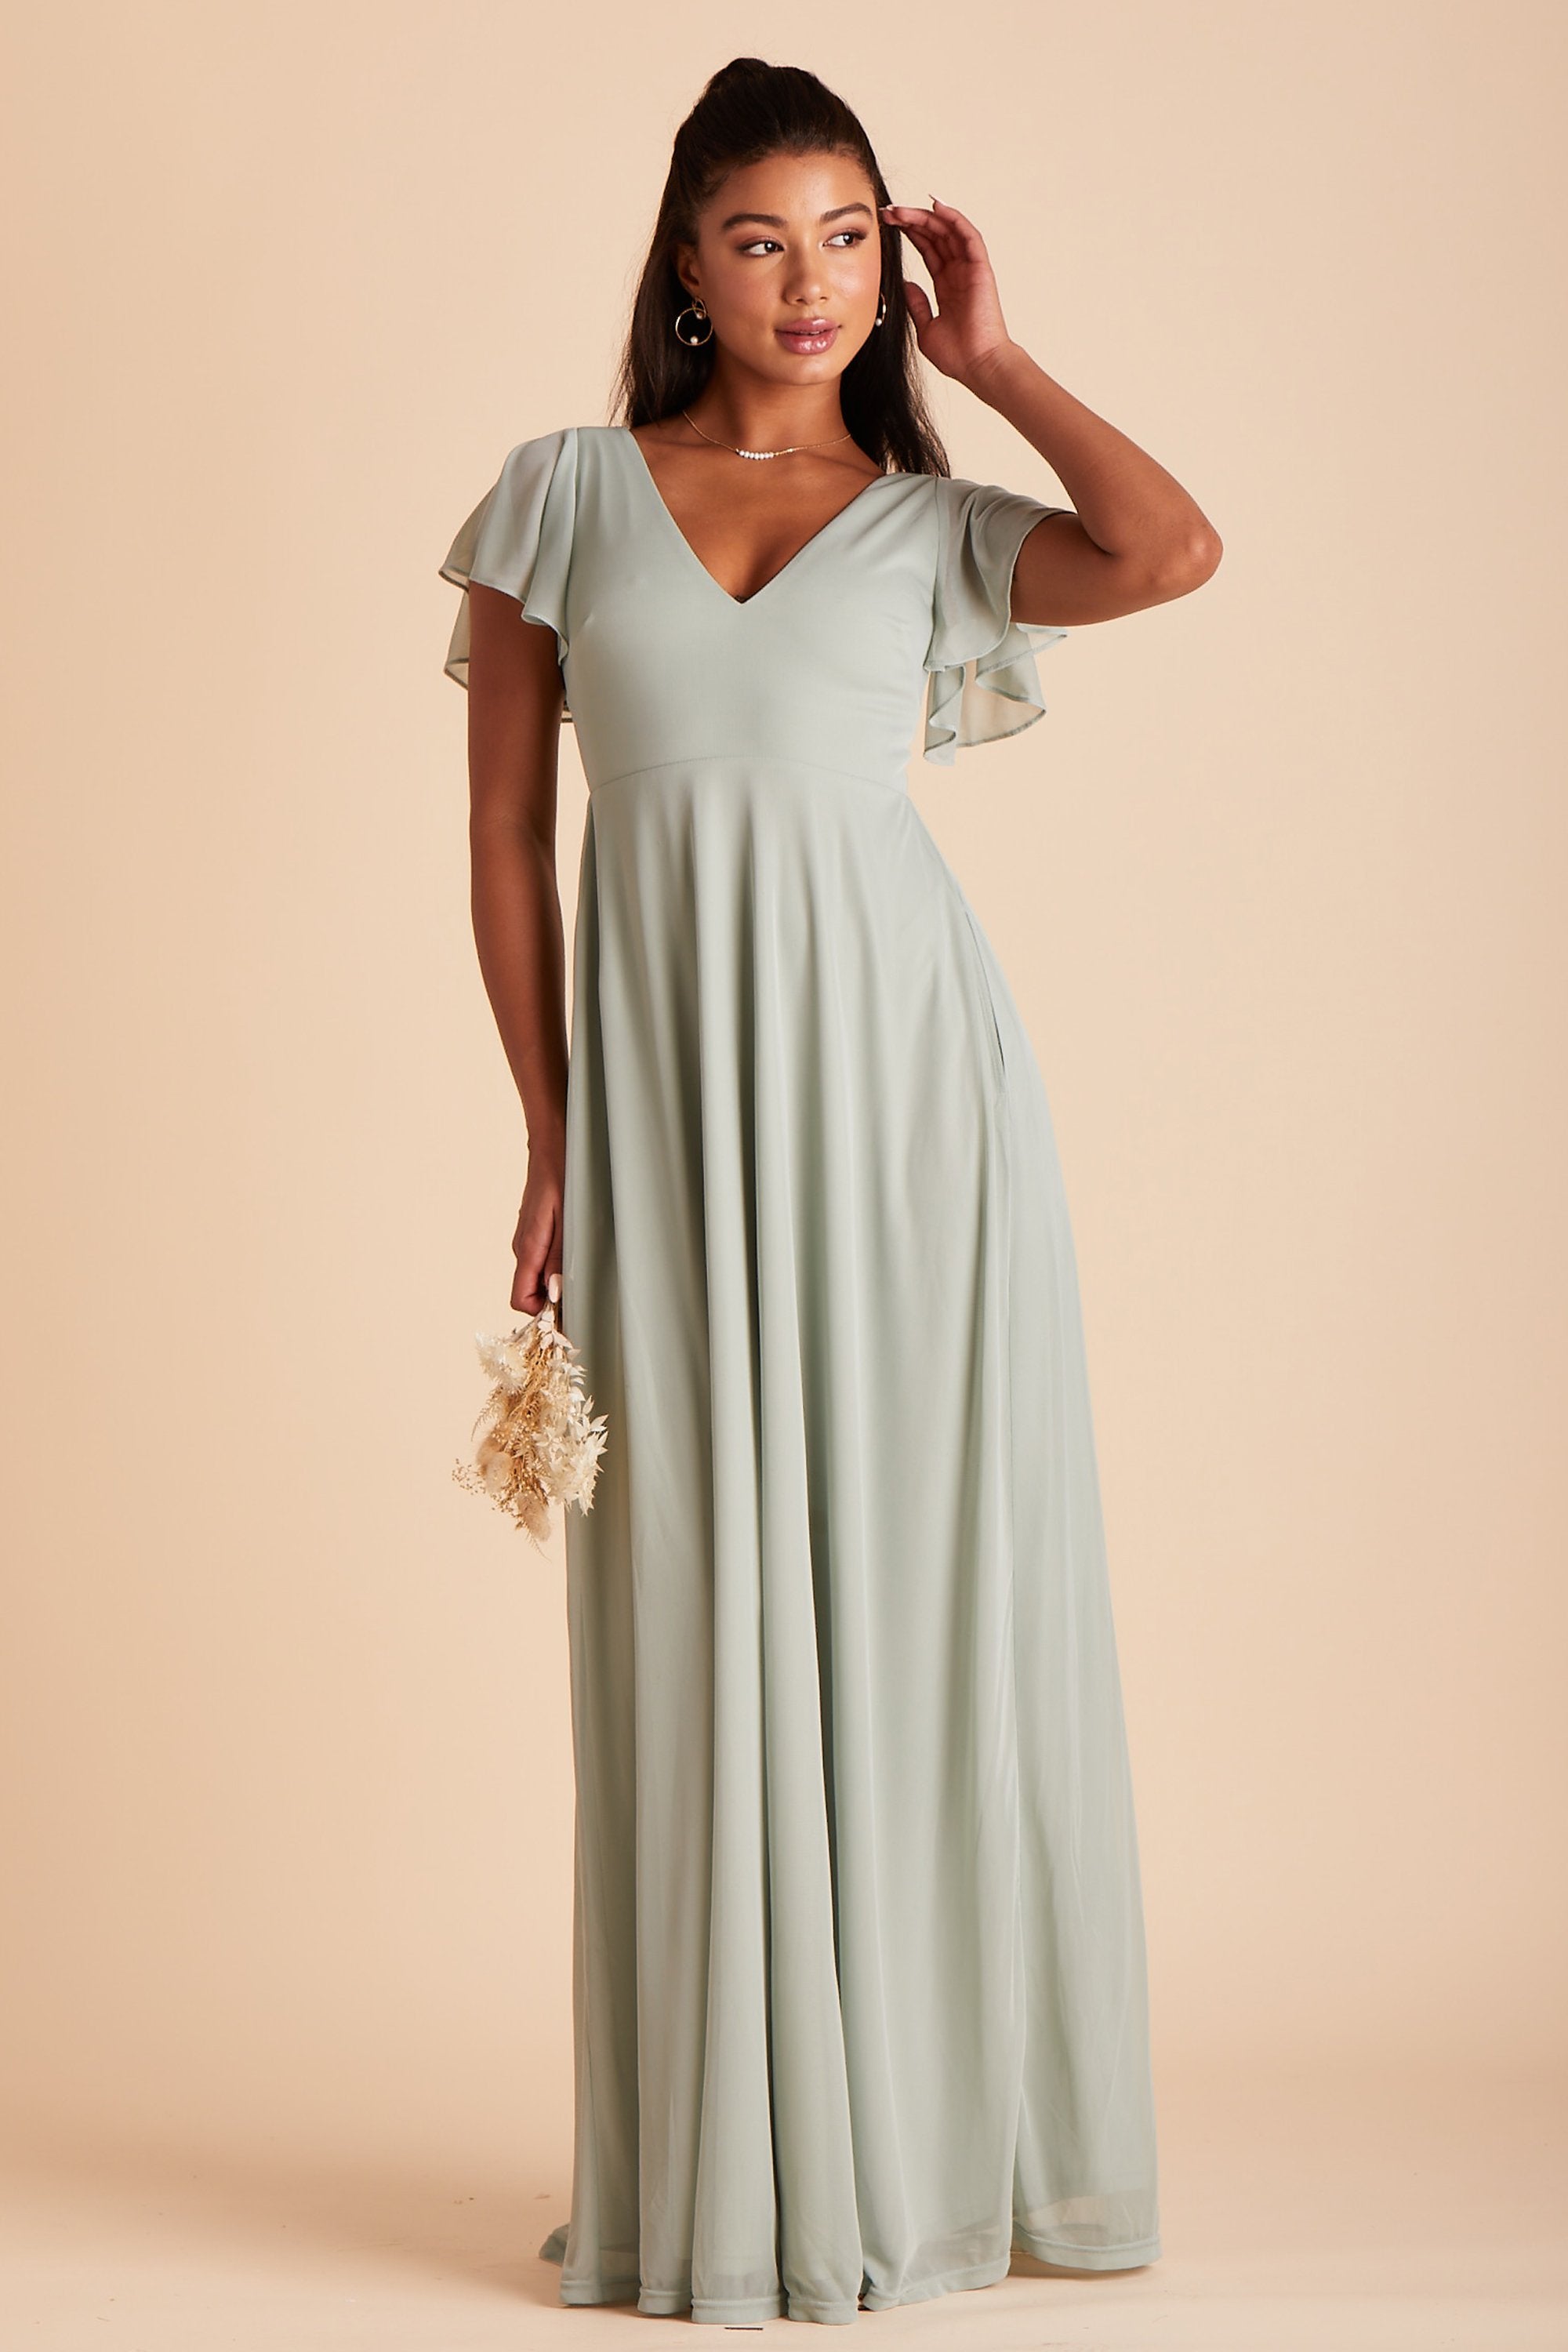 Hannah bridesmaids dress in sage green mesh by Birdy Grey, front view